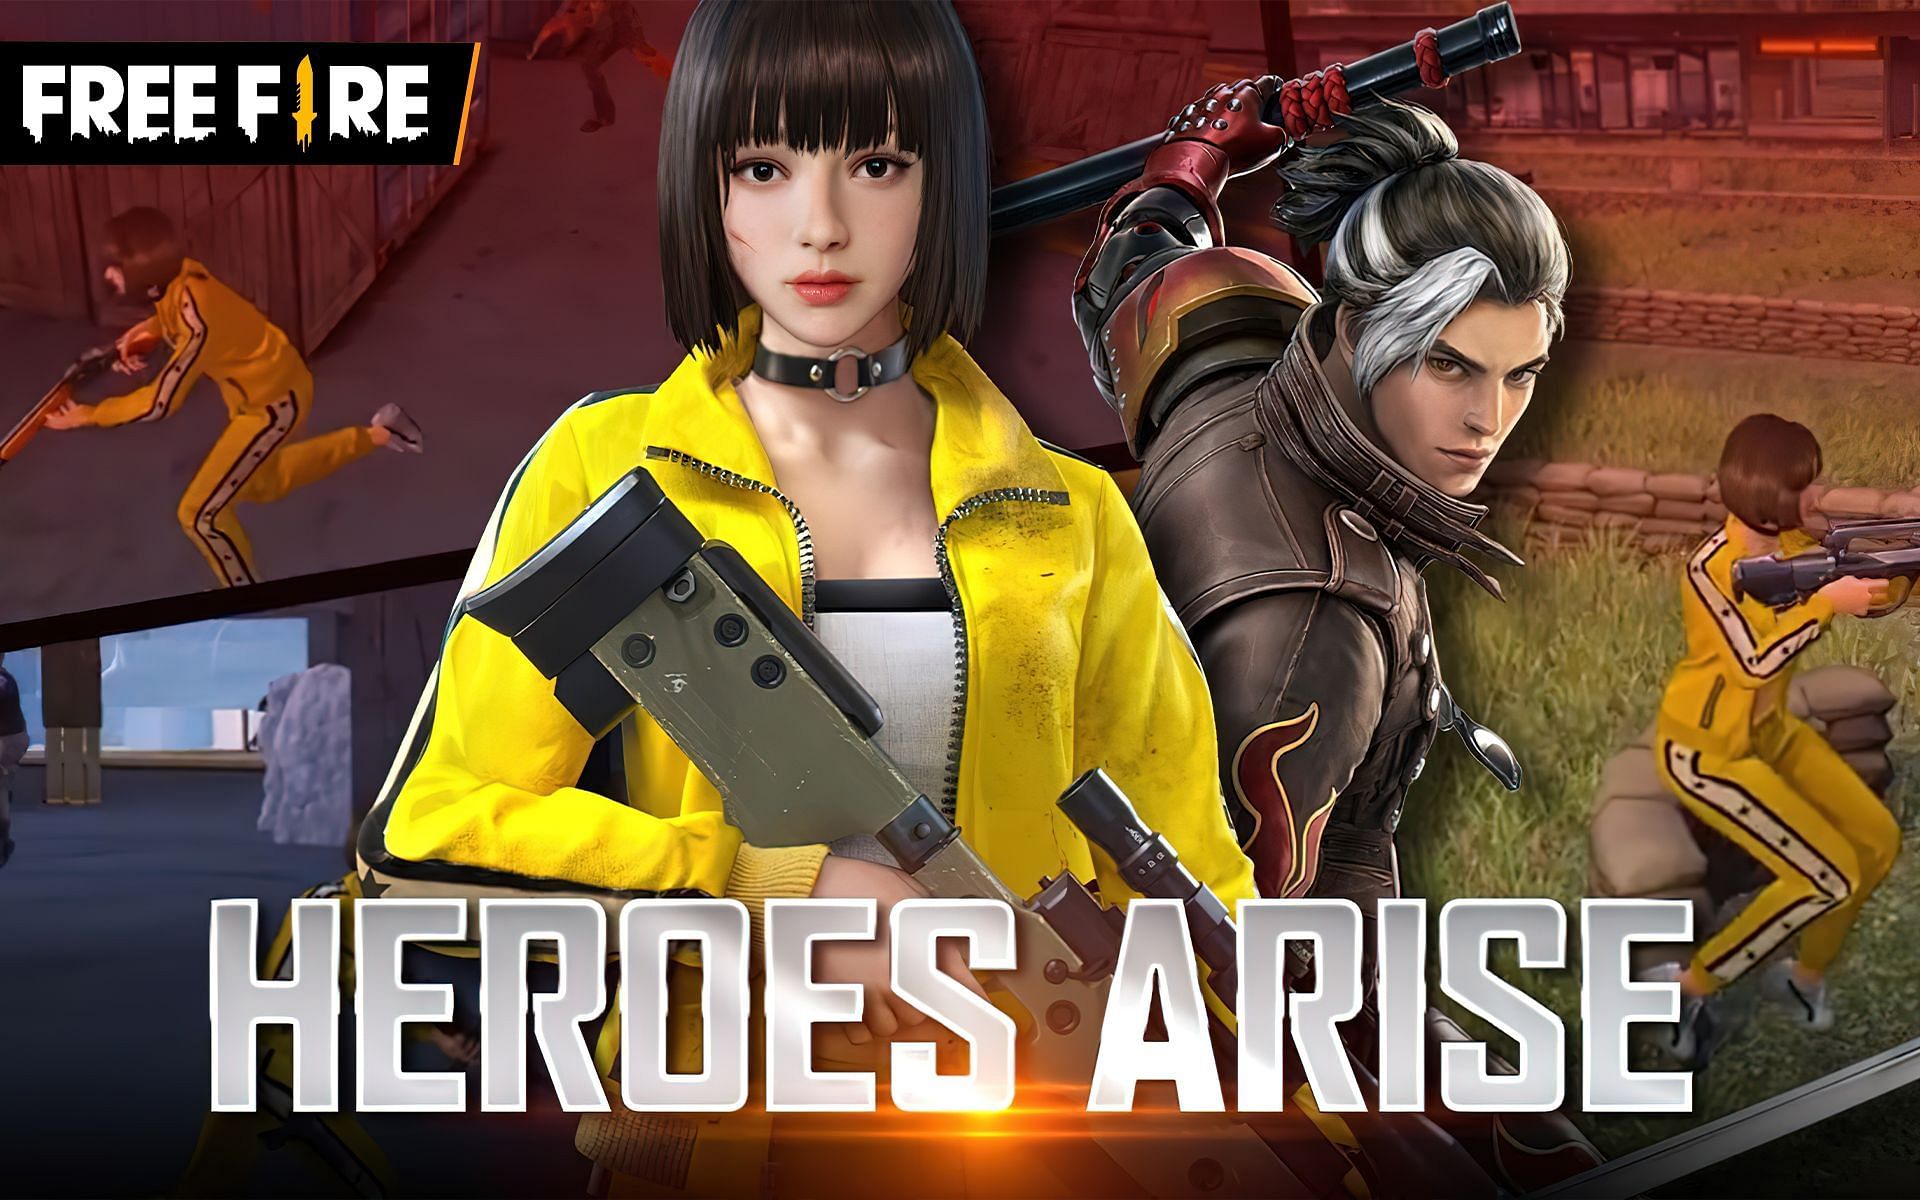 Free Fire Heroes Arise features (Image via Garena)